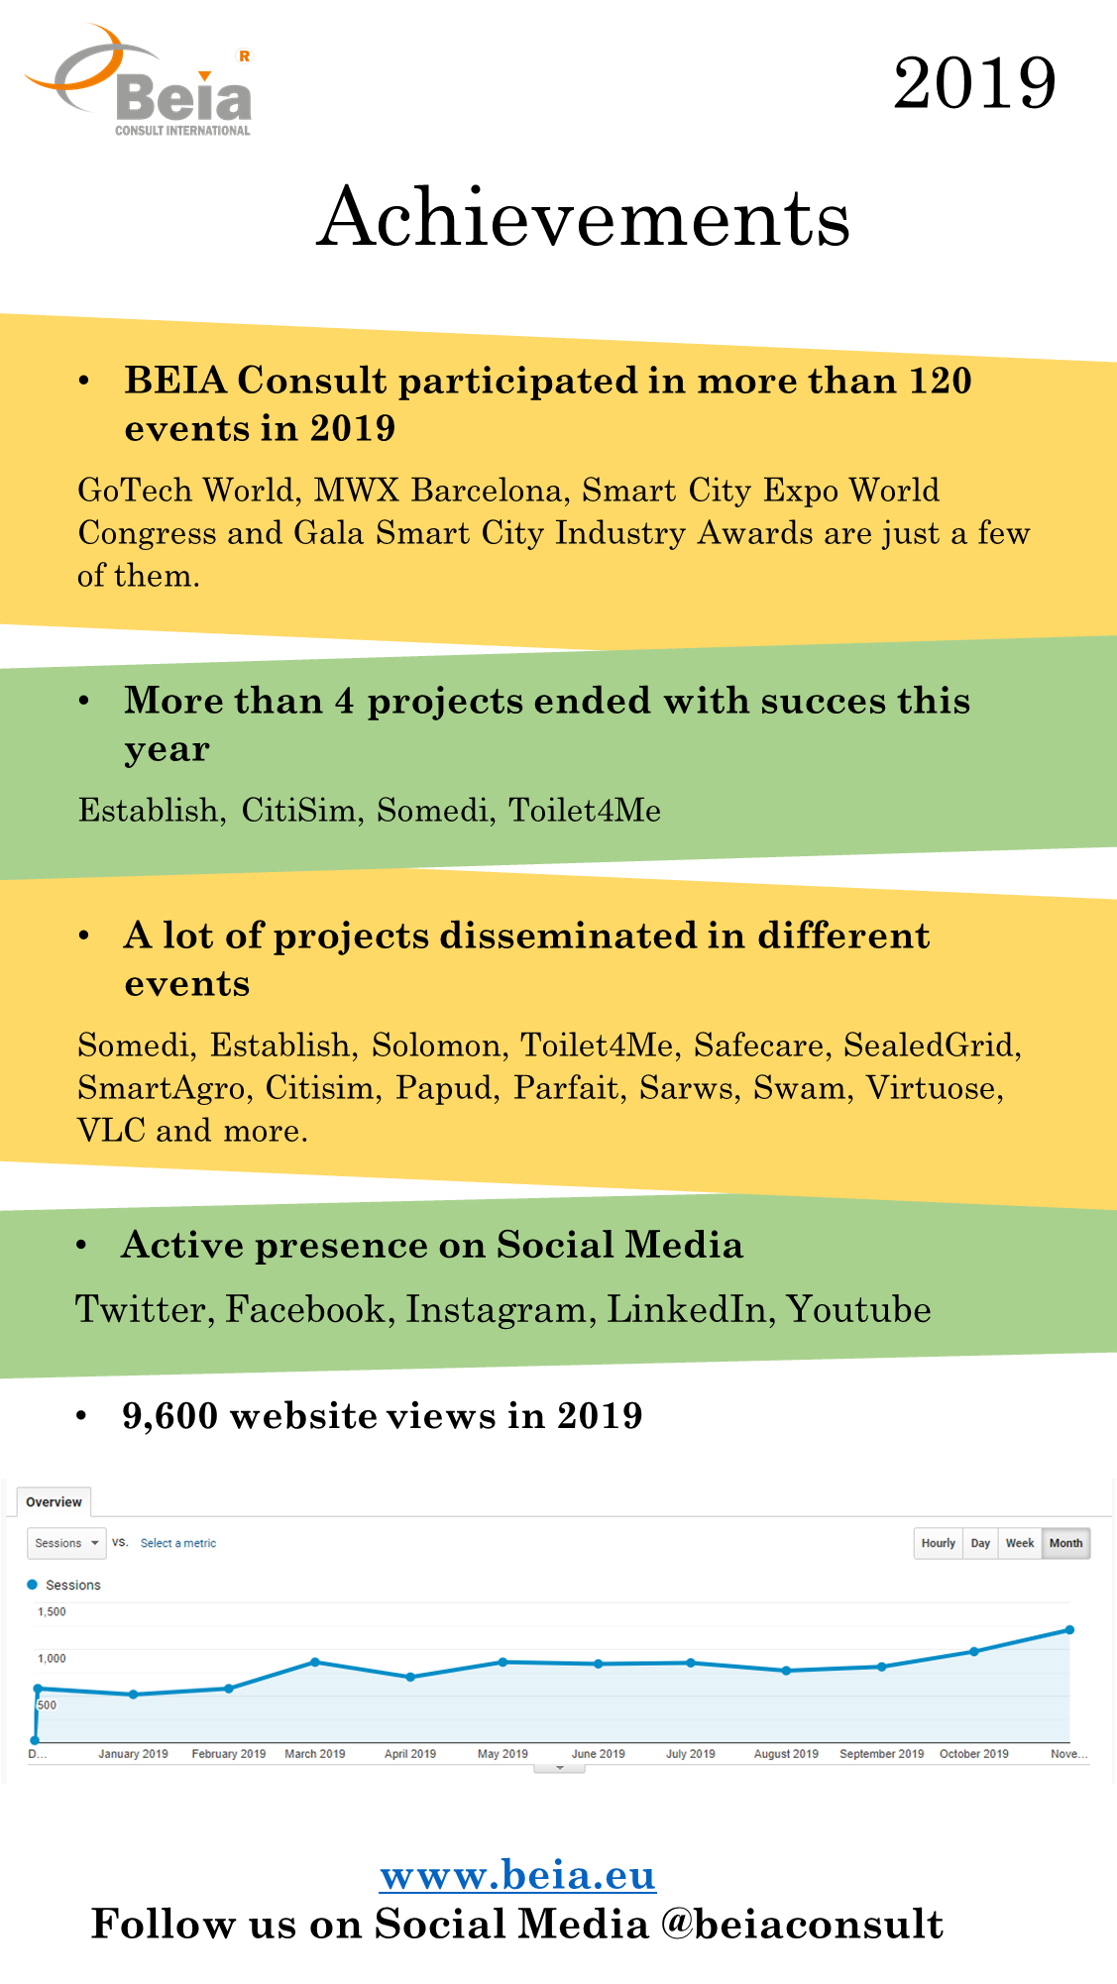 BEIA Consult participated in more than 120 events in 2019.
GoTech World, MWX Barcelona, Smart City Expo World Congress, Gala Smart City Industry Awards are just a few of them.
More than 4 projects ended with succes this year
Establish, CitiSim, Somedi, Toilet4Me
A lot of projects disseminated in different events
Somedi, Establish, Solomon, Toilet4Me, Safecare, SealedGrid, SmartAgro, Citisim, Papud, Parfait, Sarws, Swam, Virtuose, VLC and more.
New Social Media account
Instagram
Active presence on Social Media
Twitter, Facebook, Instagram, LinkedIn, Youtube
9,600 website views in 2019
